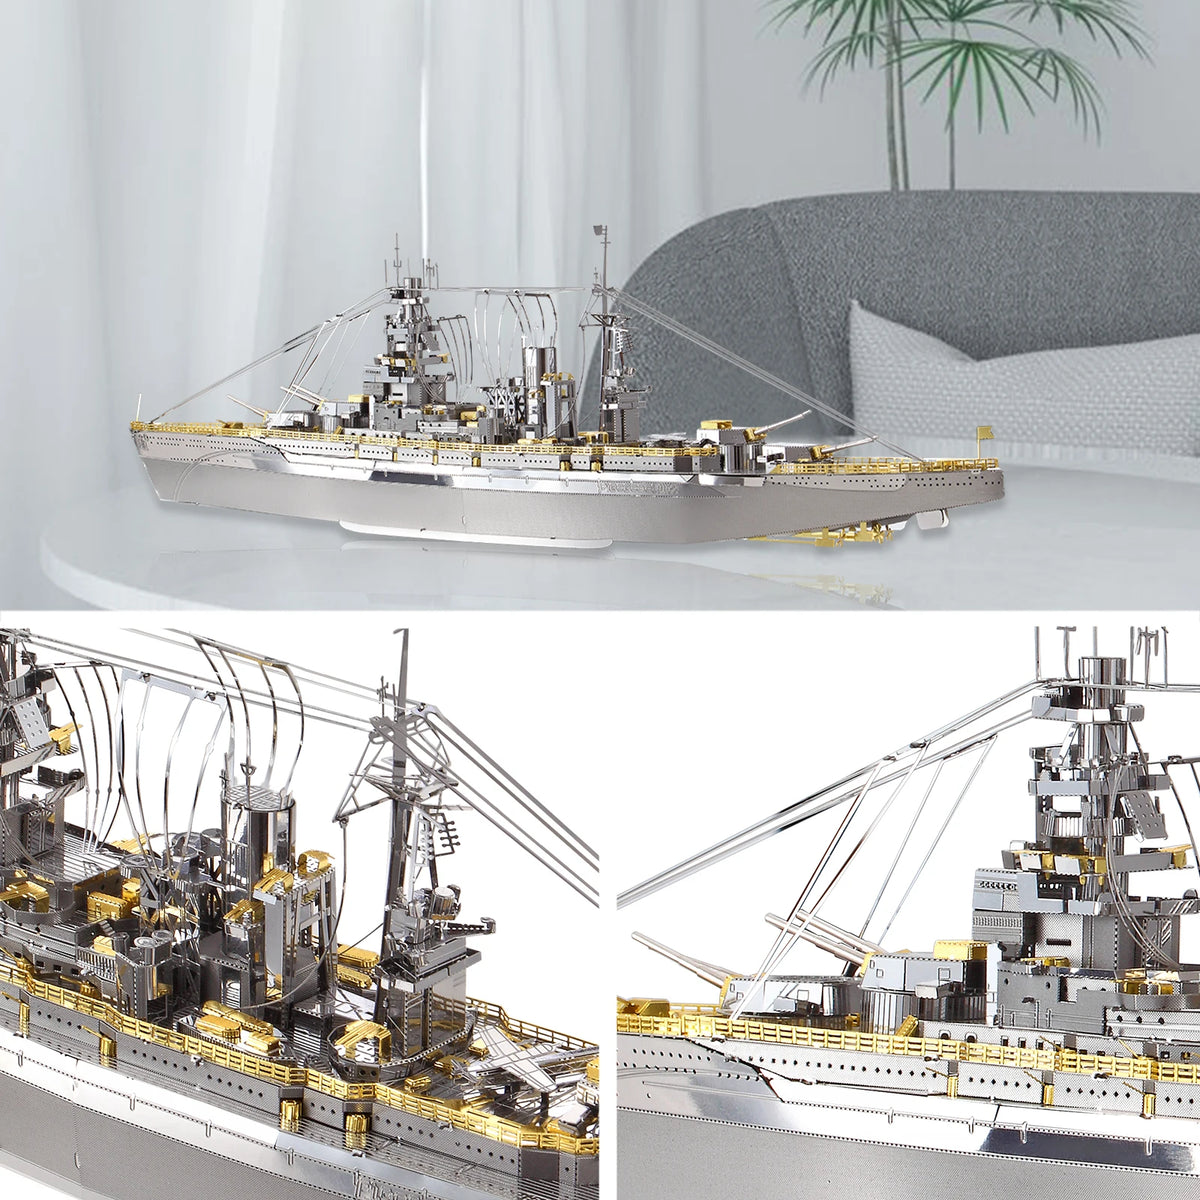 3D Metal Puzzle Model Building Kits - Nagato Class Battleship Jigsaw Toy ,Christmas Birthday Gifts for Adults